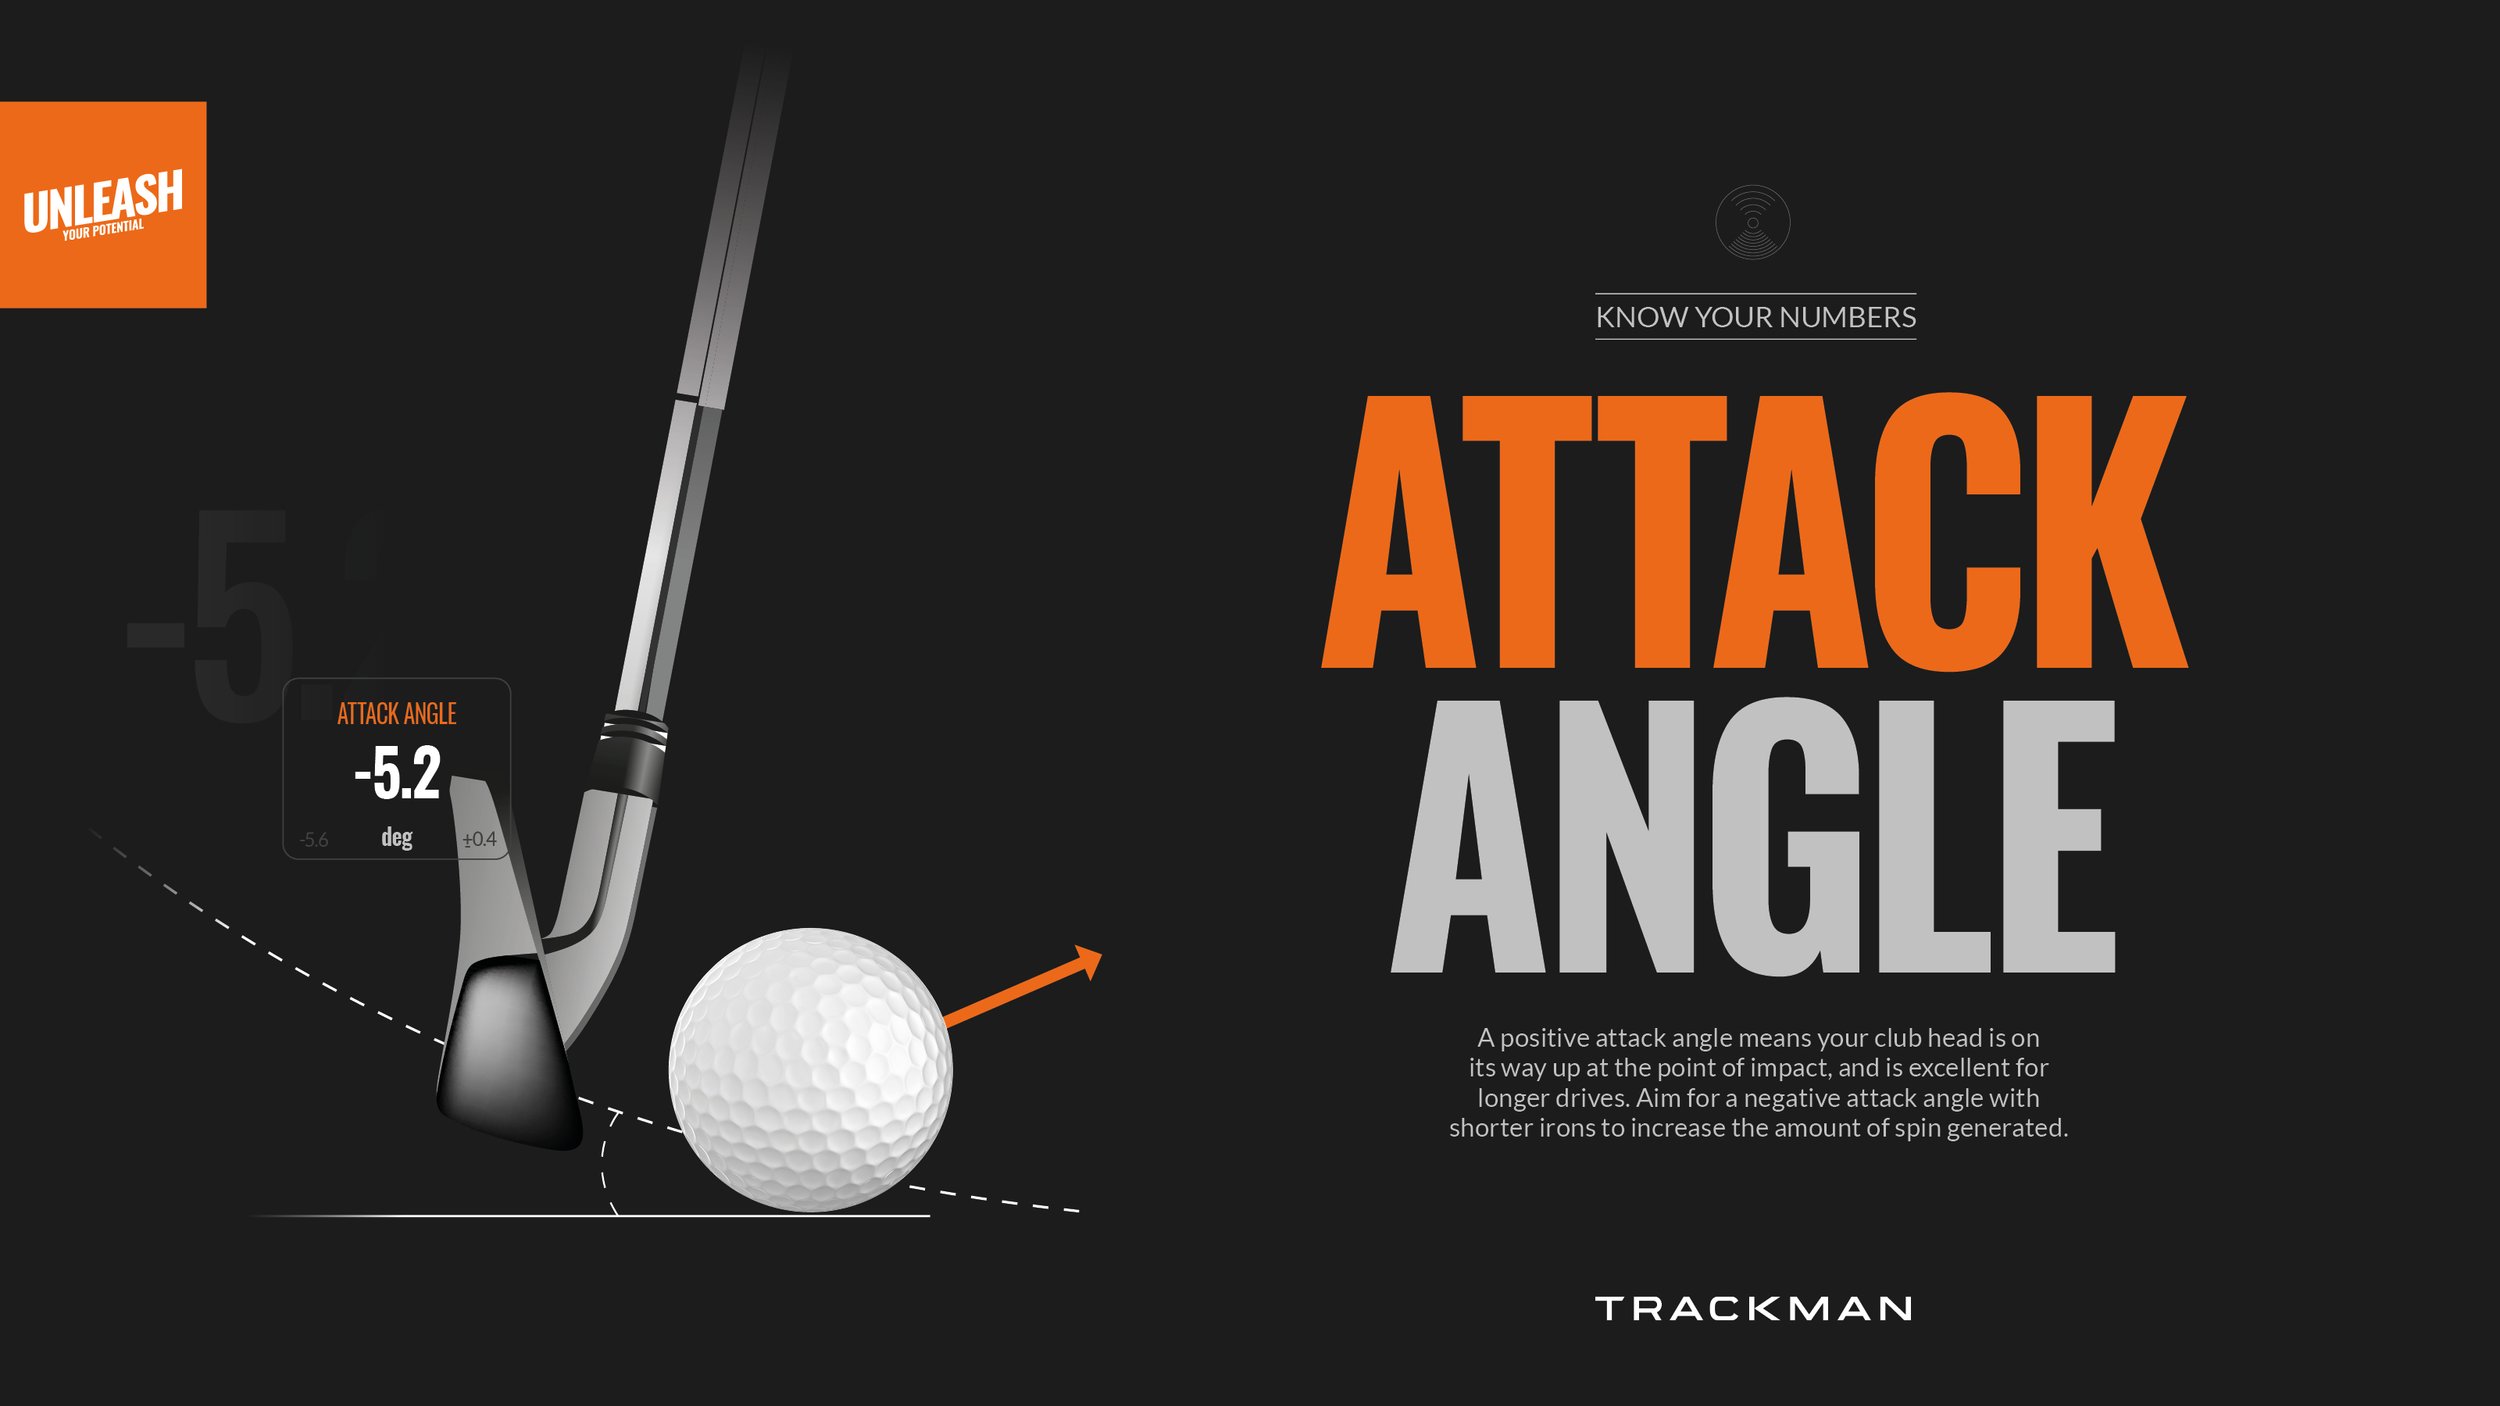 Attack angle_screen_1920x1080px.jpg